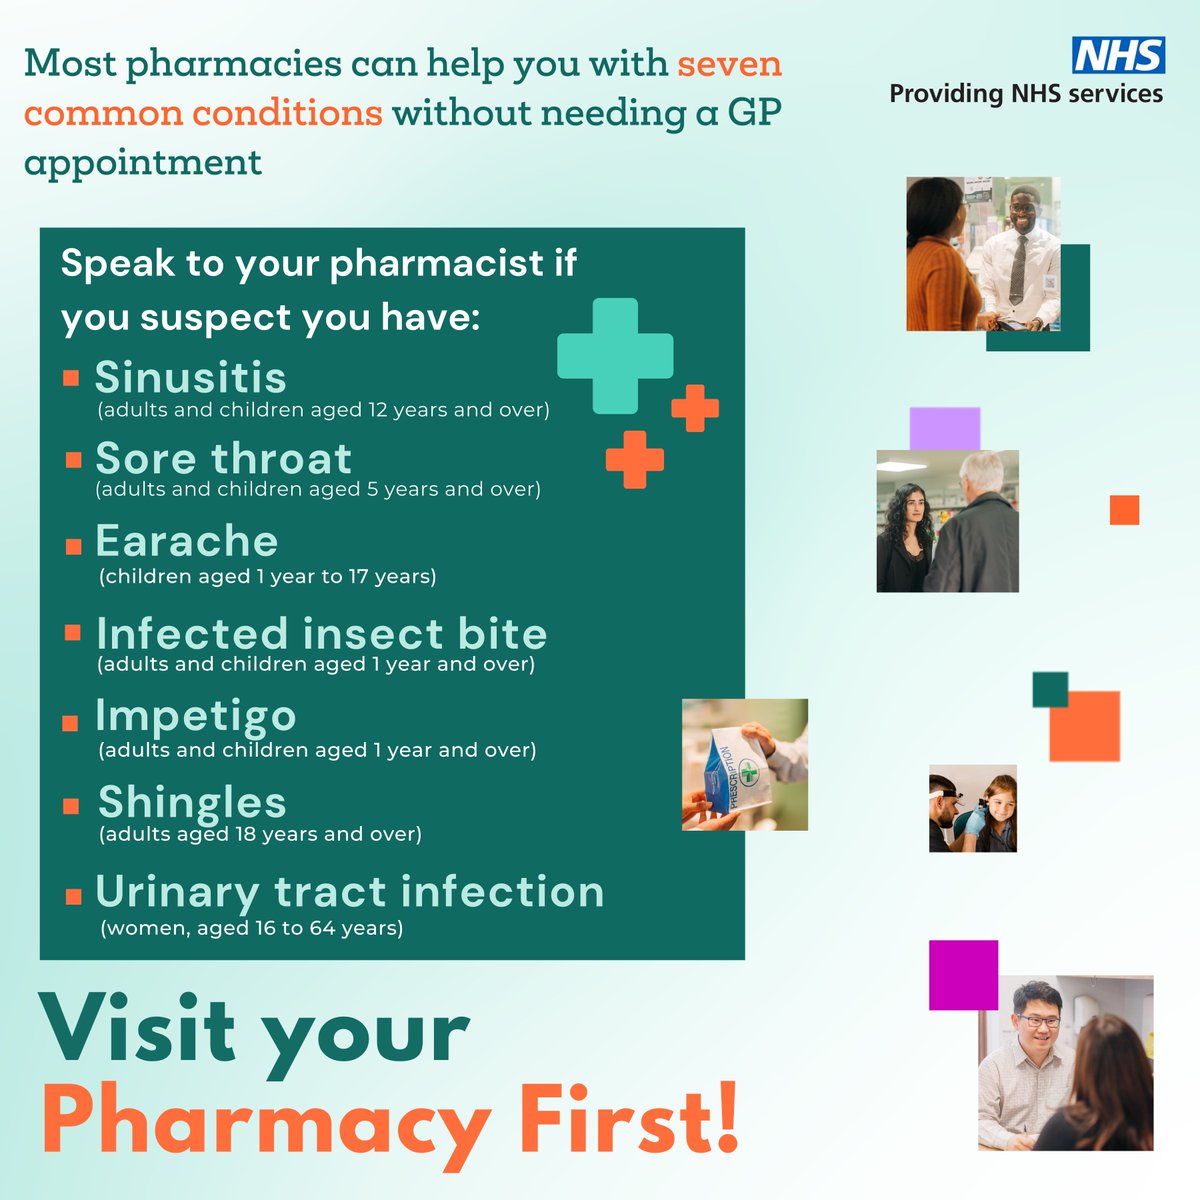 Need healthcare advice?🆘🤔 Access support and NHS medicines for seven common health conditions directly from your local pharmacy through the Pharmacy First service. 🗨 Ask your local pharmacy for more information about this NHS service.